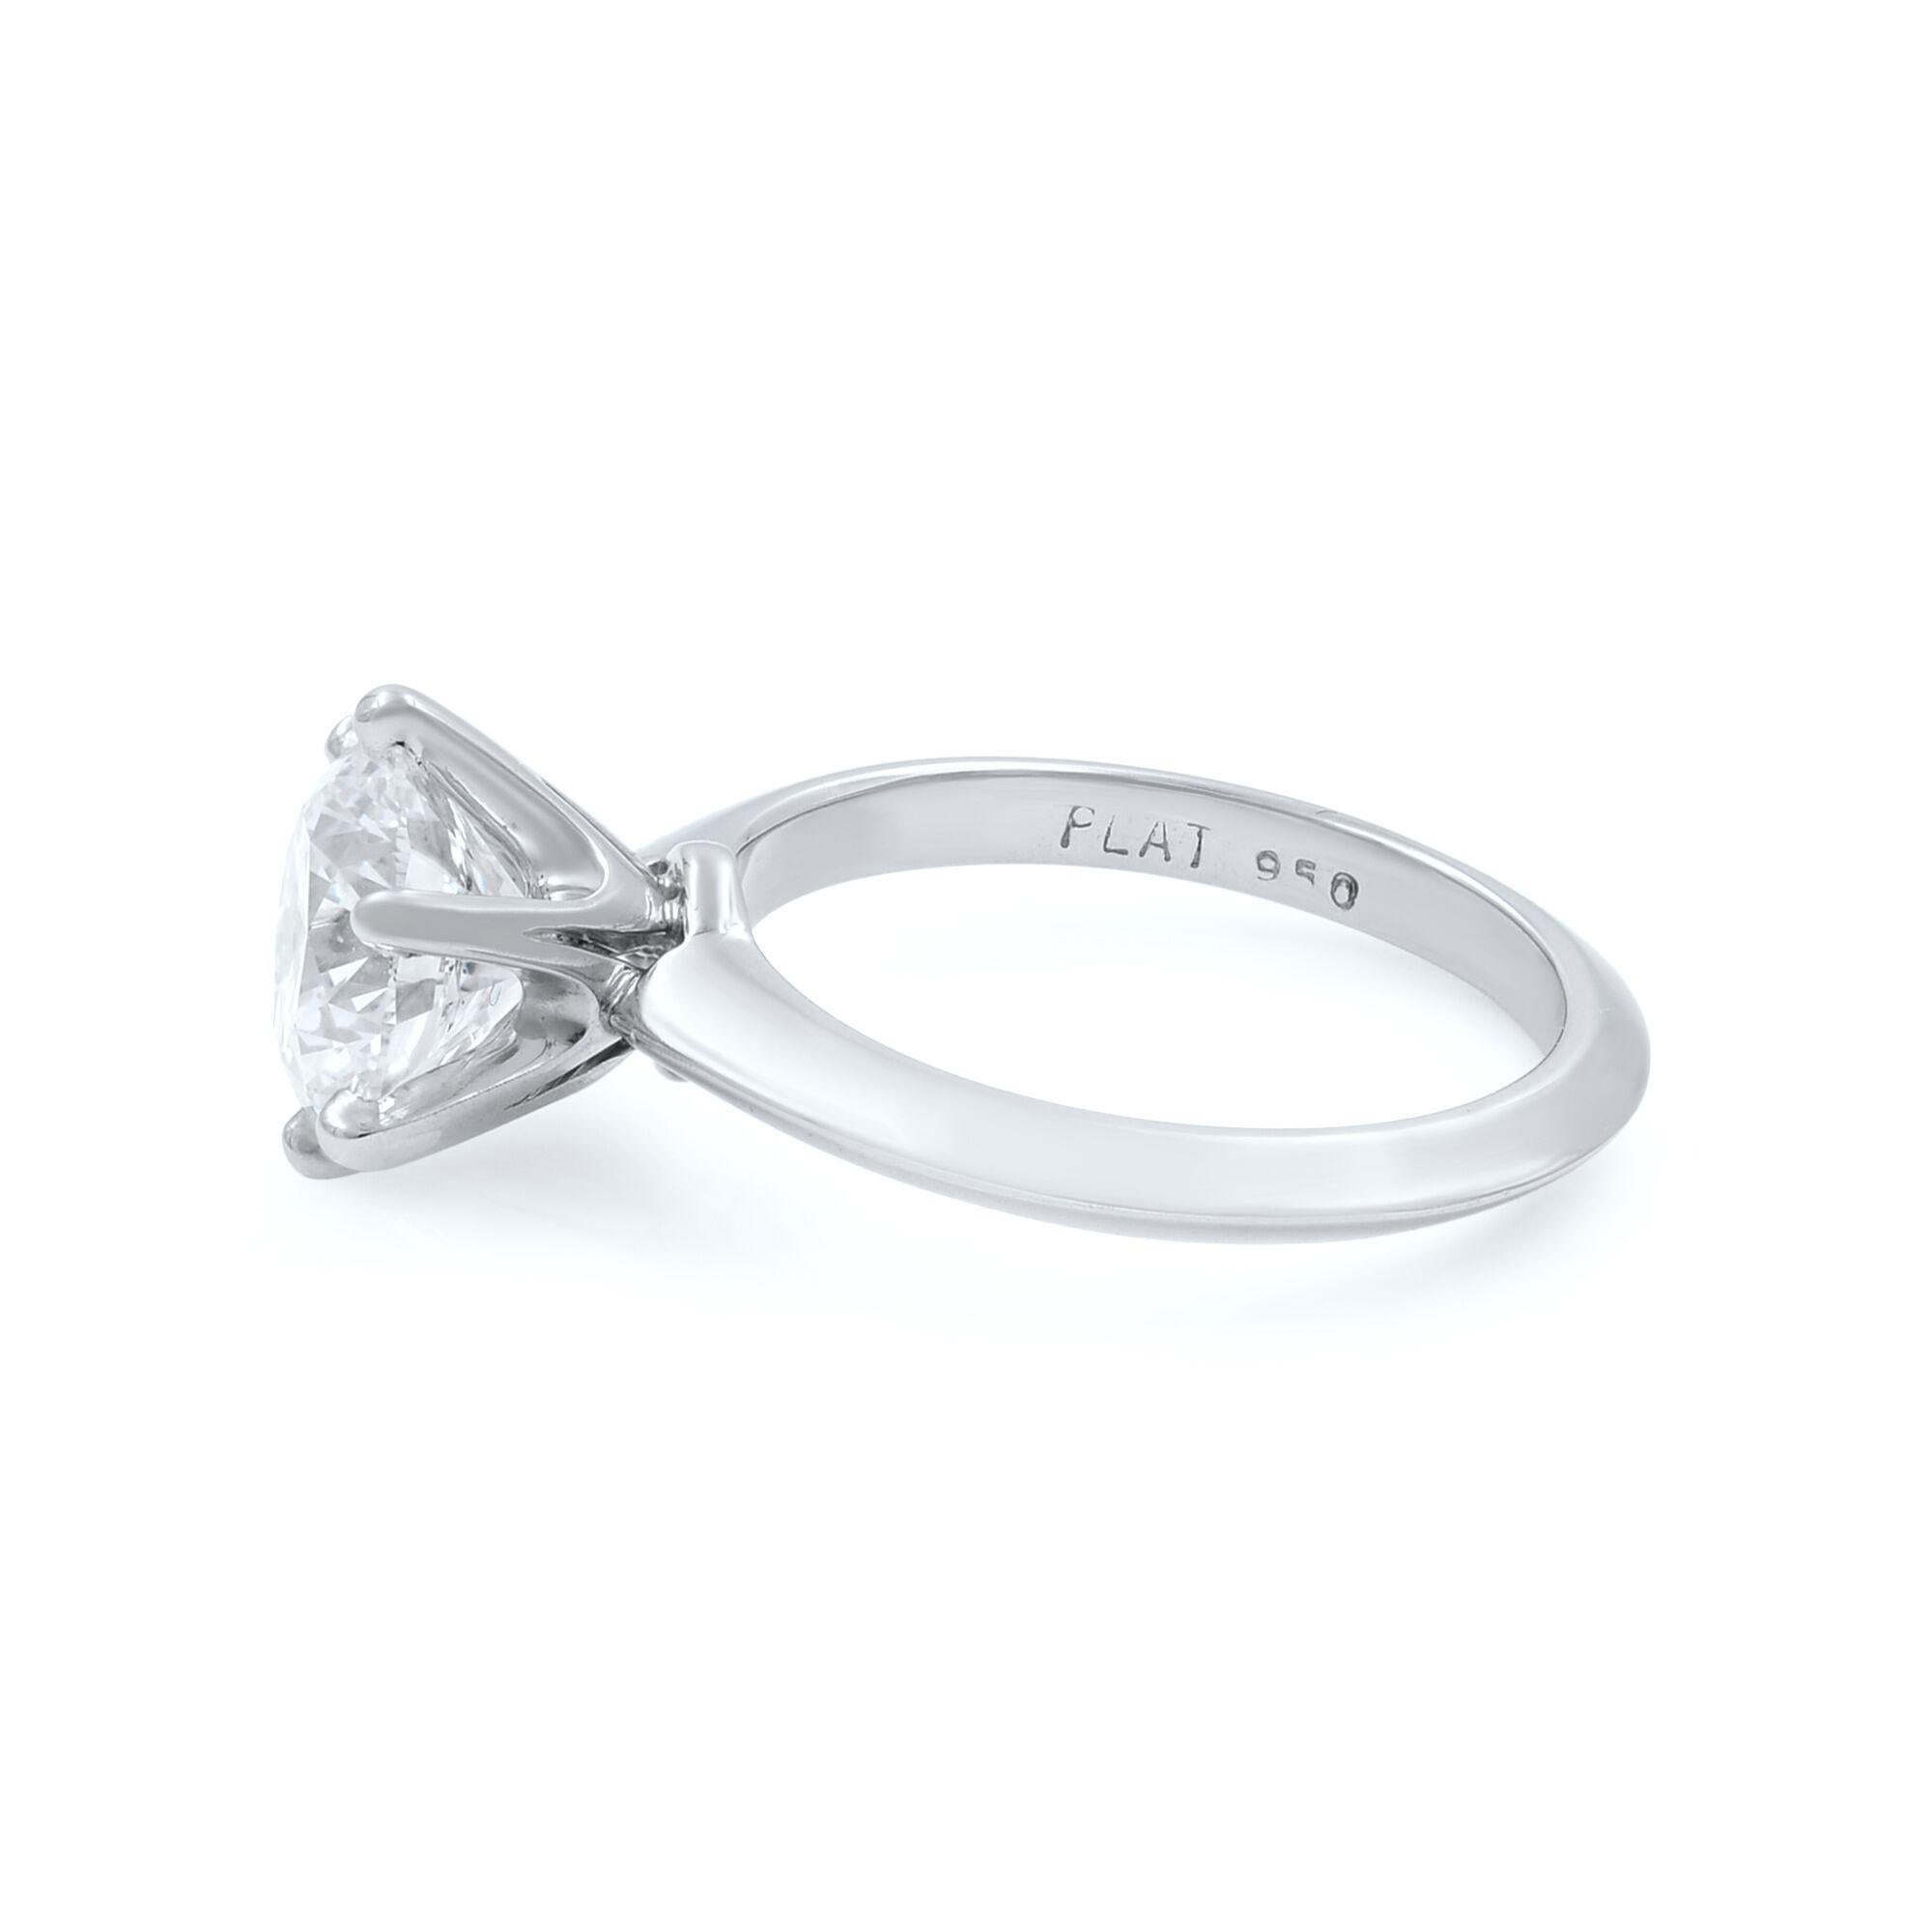 2 carat round cut solitaire engagement ring